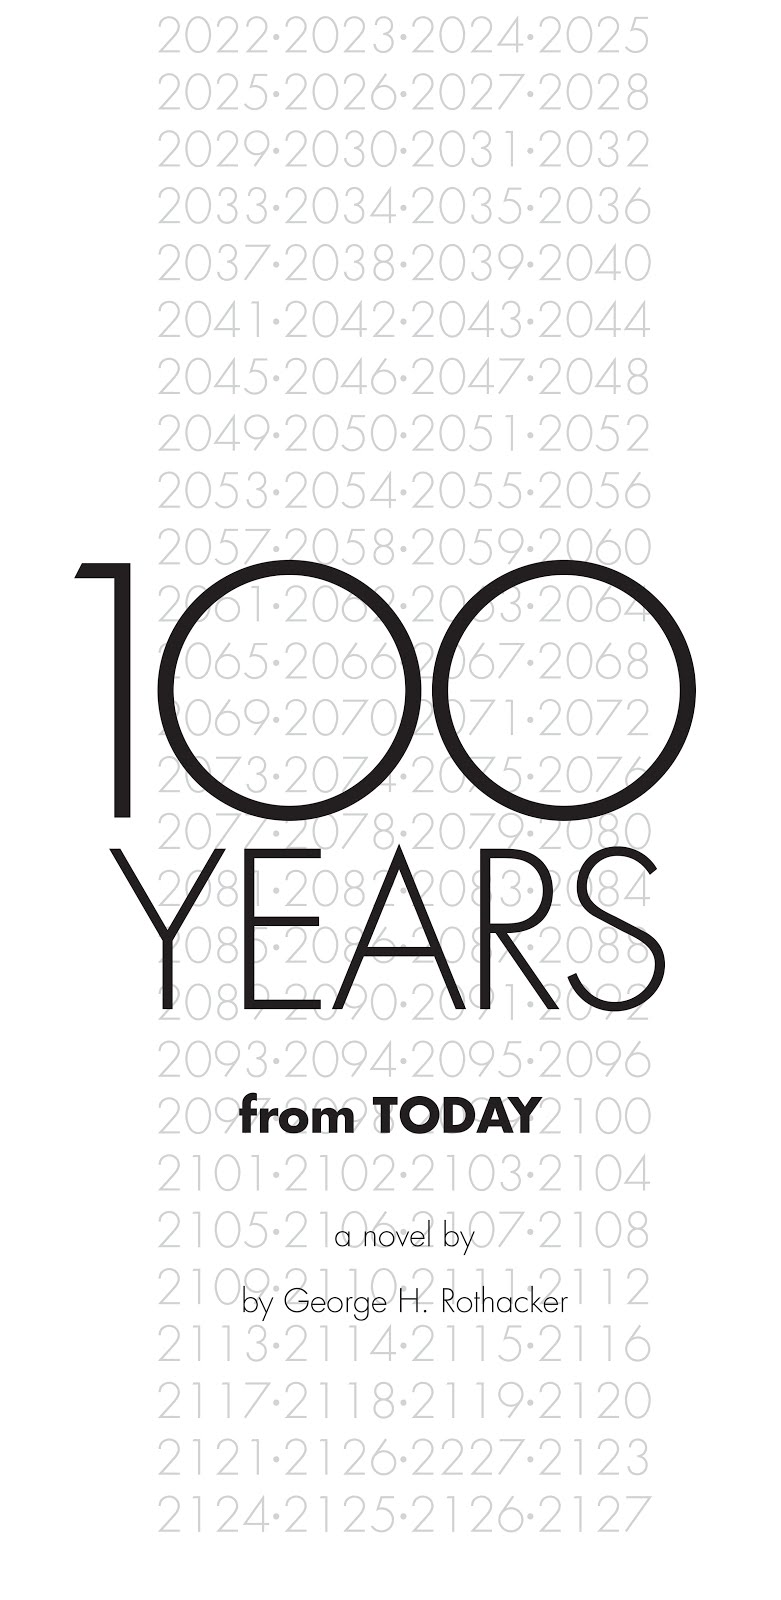 100 Years from Today - A Novel